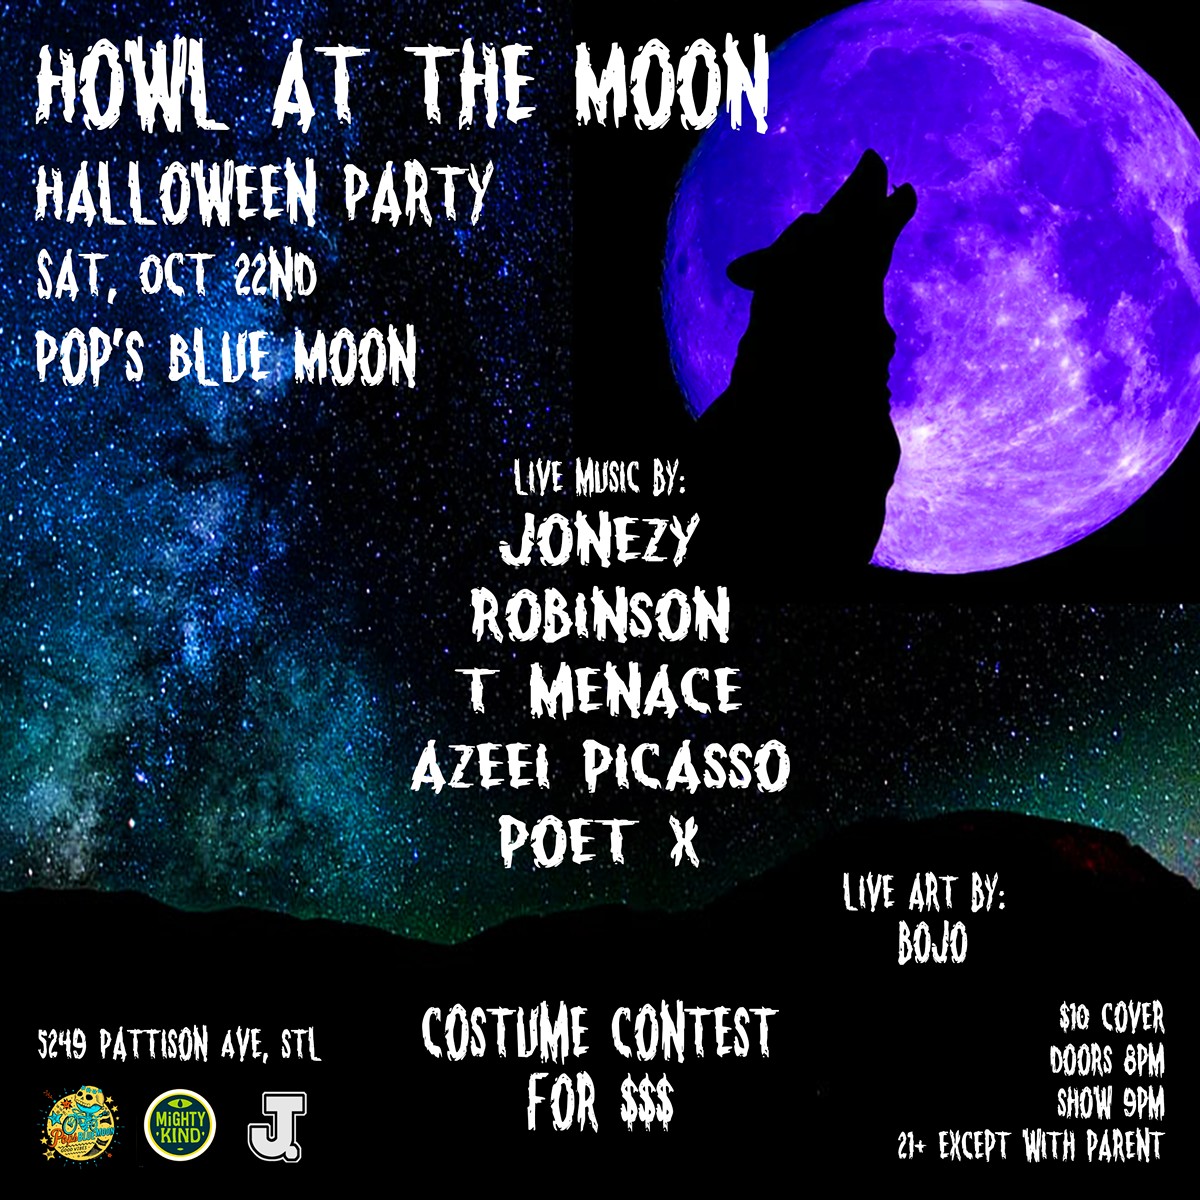 Howl at the Moon Halloween Party 10.22.22 at Pop's Blue Moon 8pm